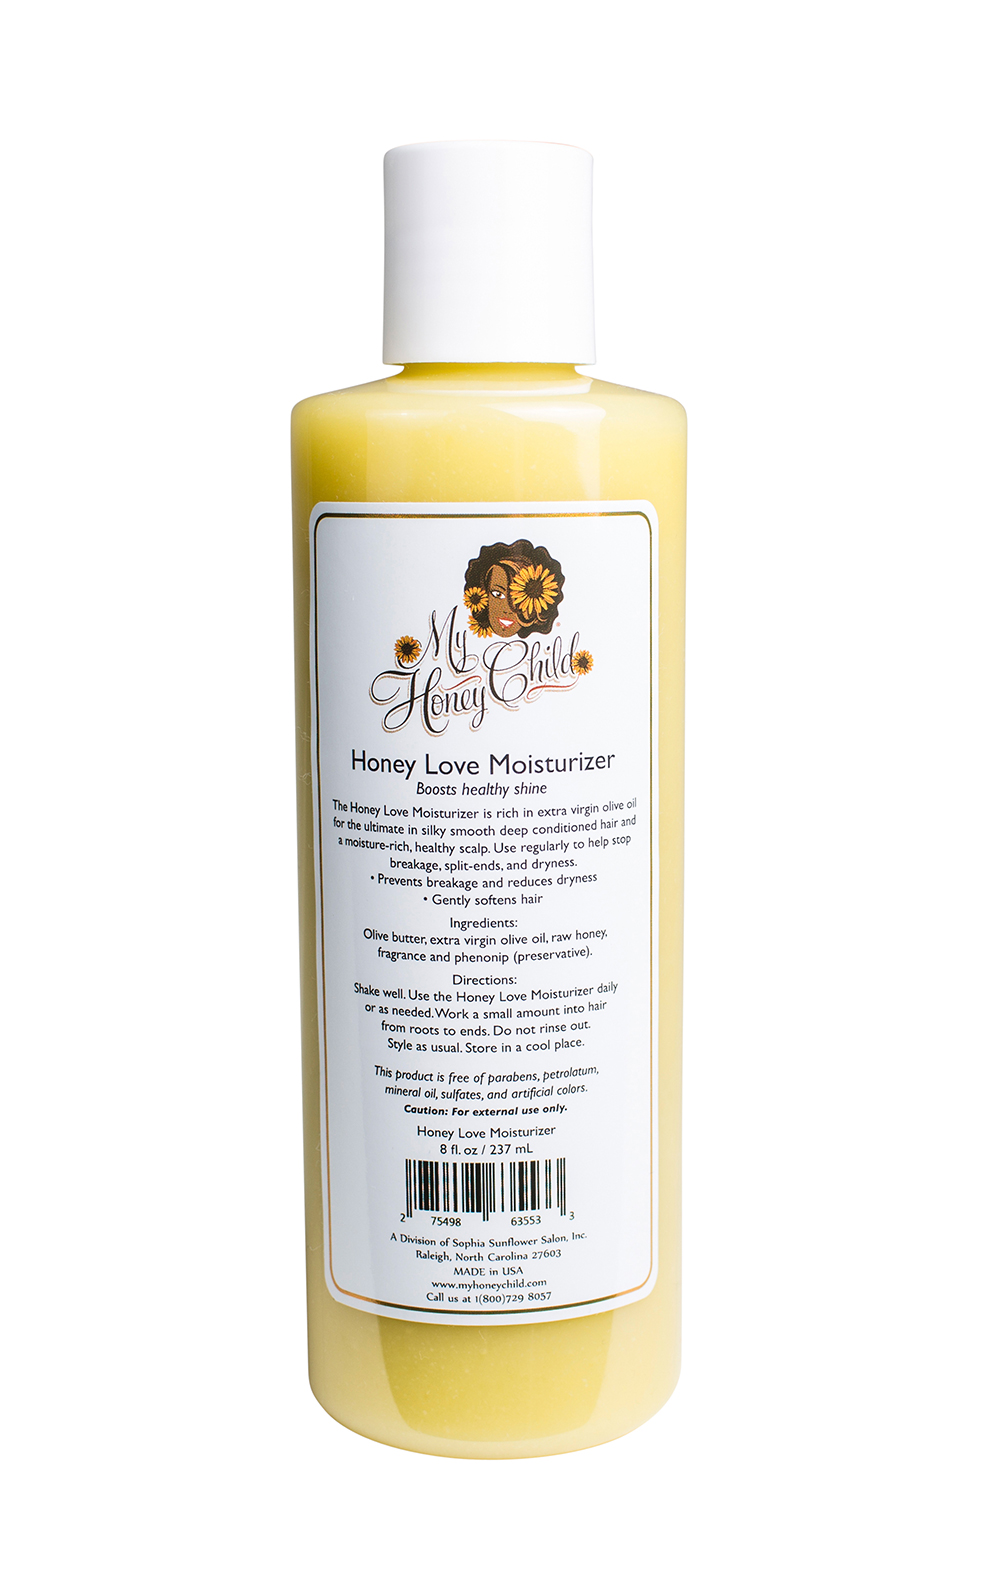 My Honey Child - Product Photography - Raleigh - 004